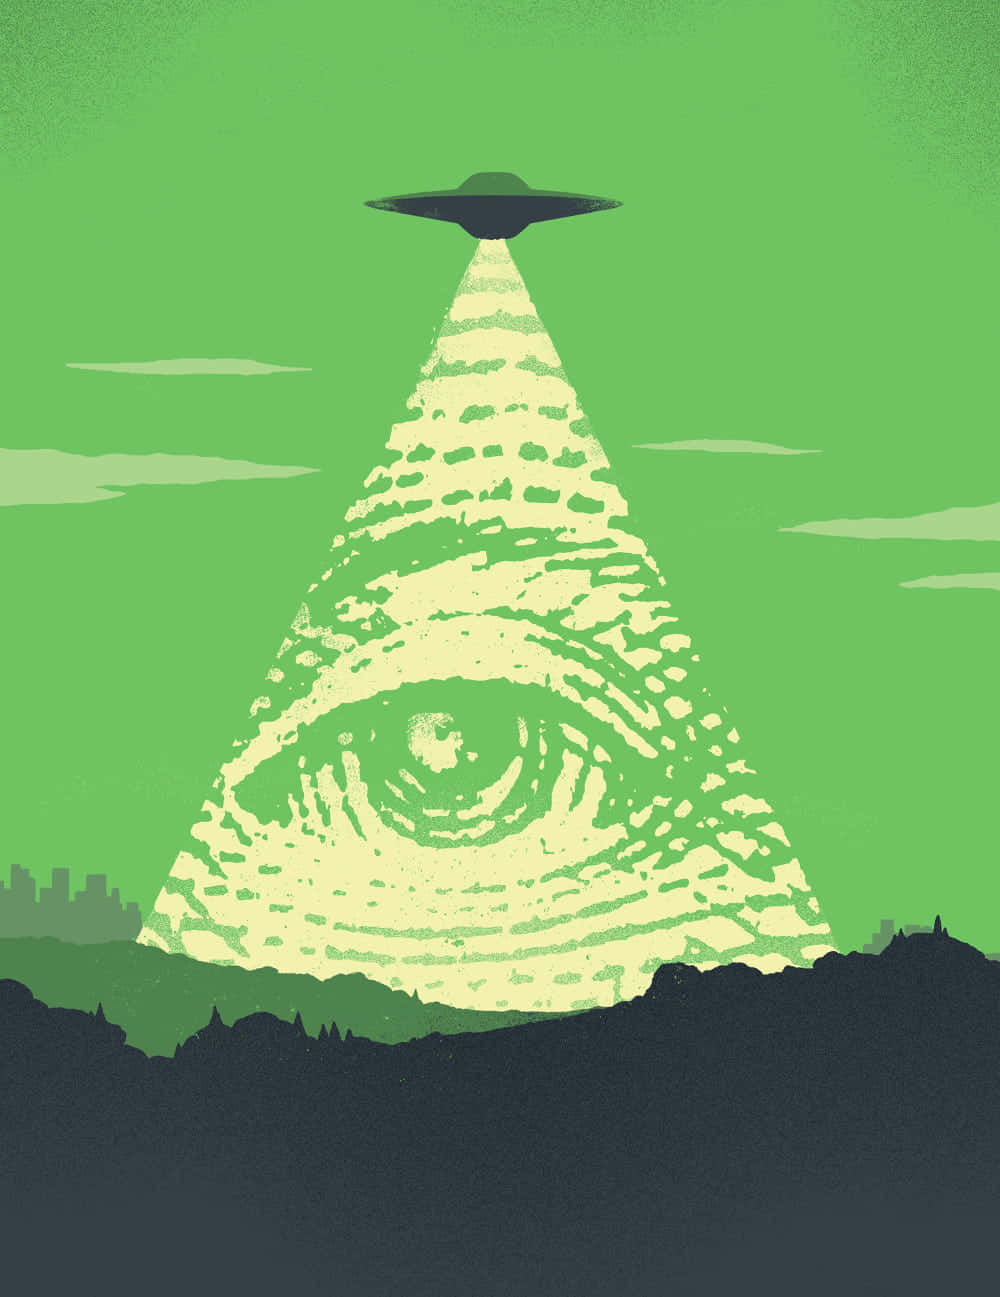 An Illustration Of An All Seeing Eye With A Pyramid In The Background